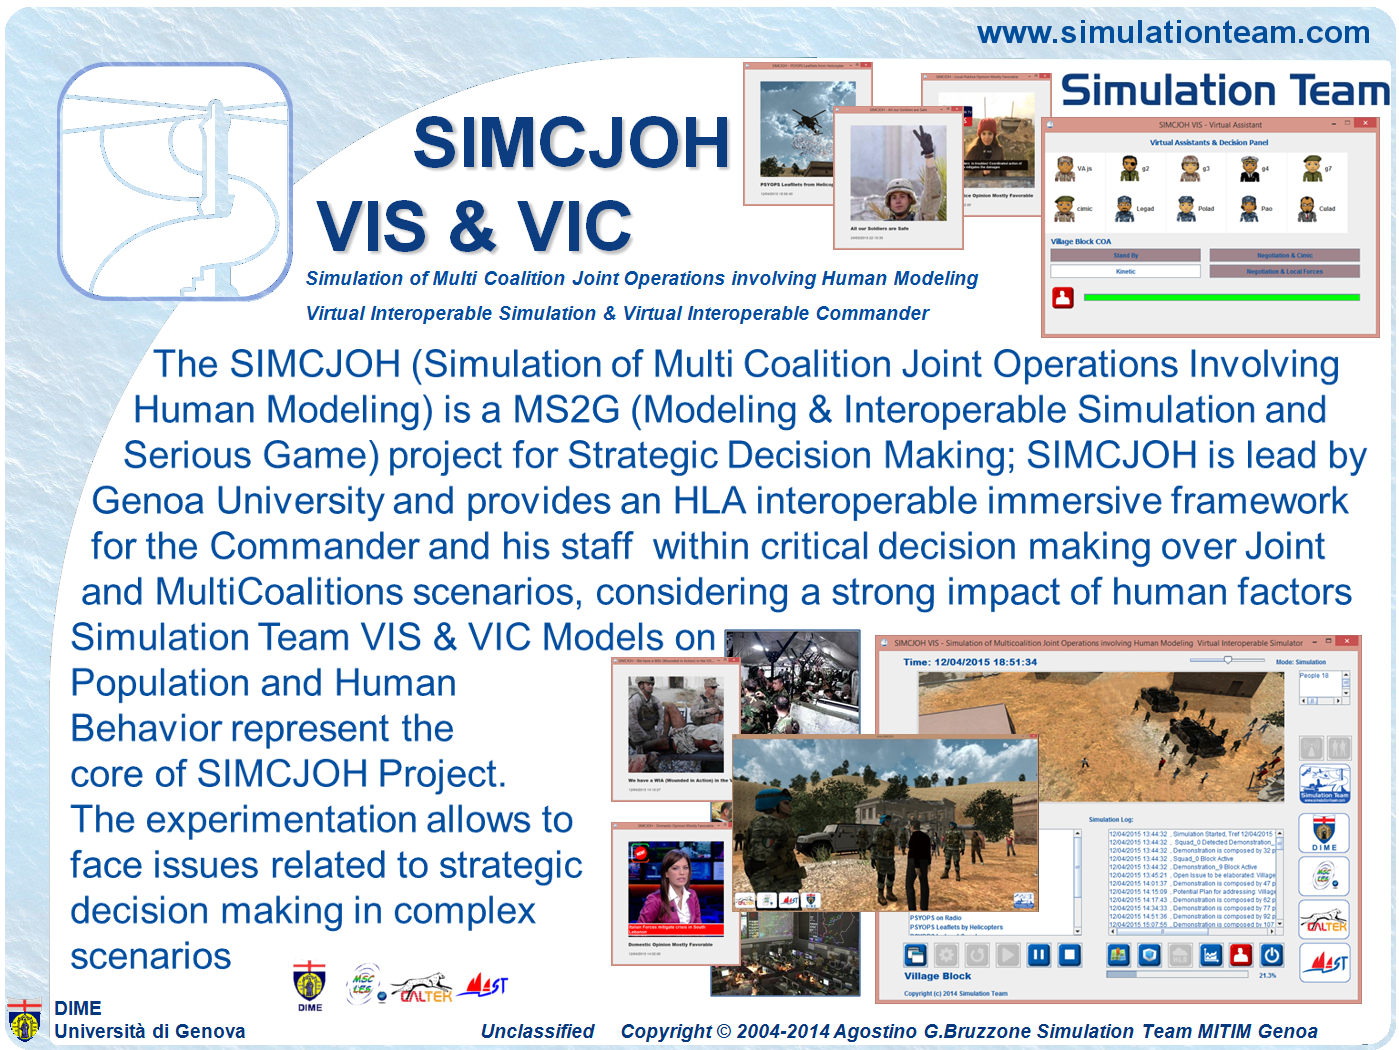 SIMCJOH VIS & VIC Simulation of Multi Coalition Joint Operations involving Human Modeling - Virtual Interoperable Simulation & Virtual Interoperable Commander